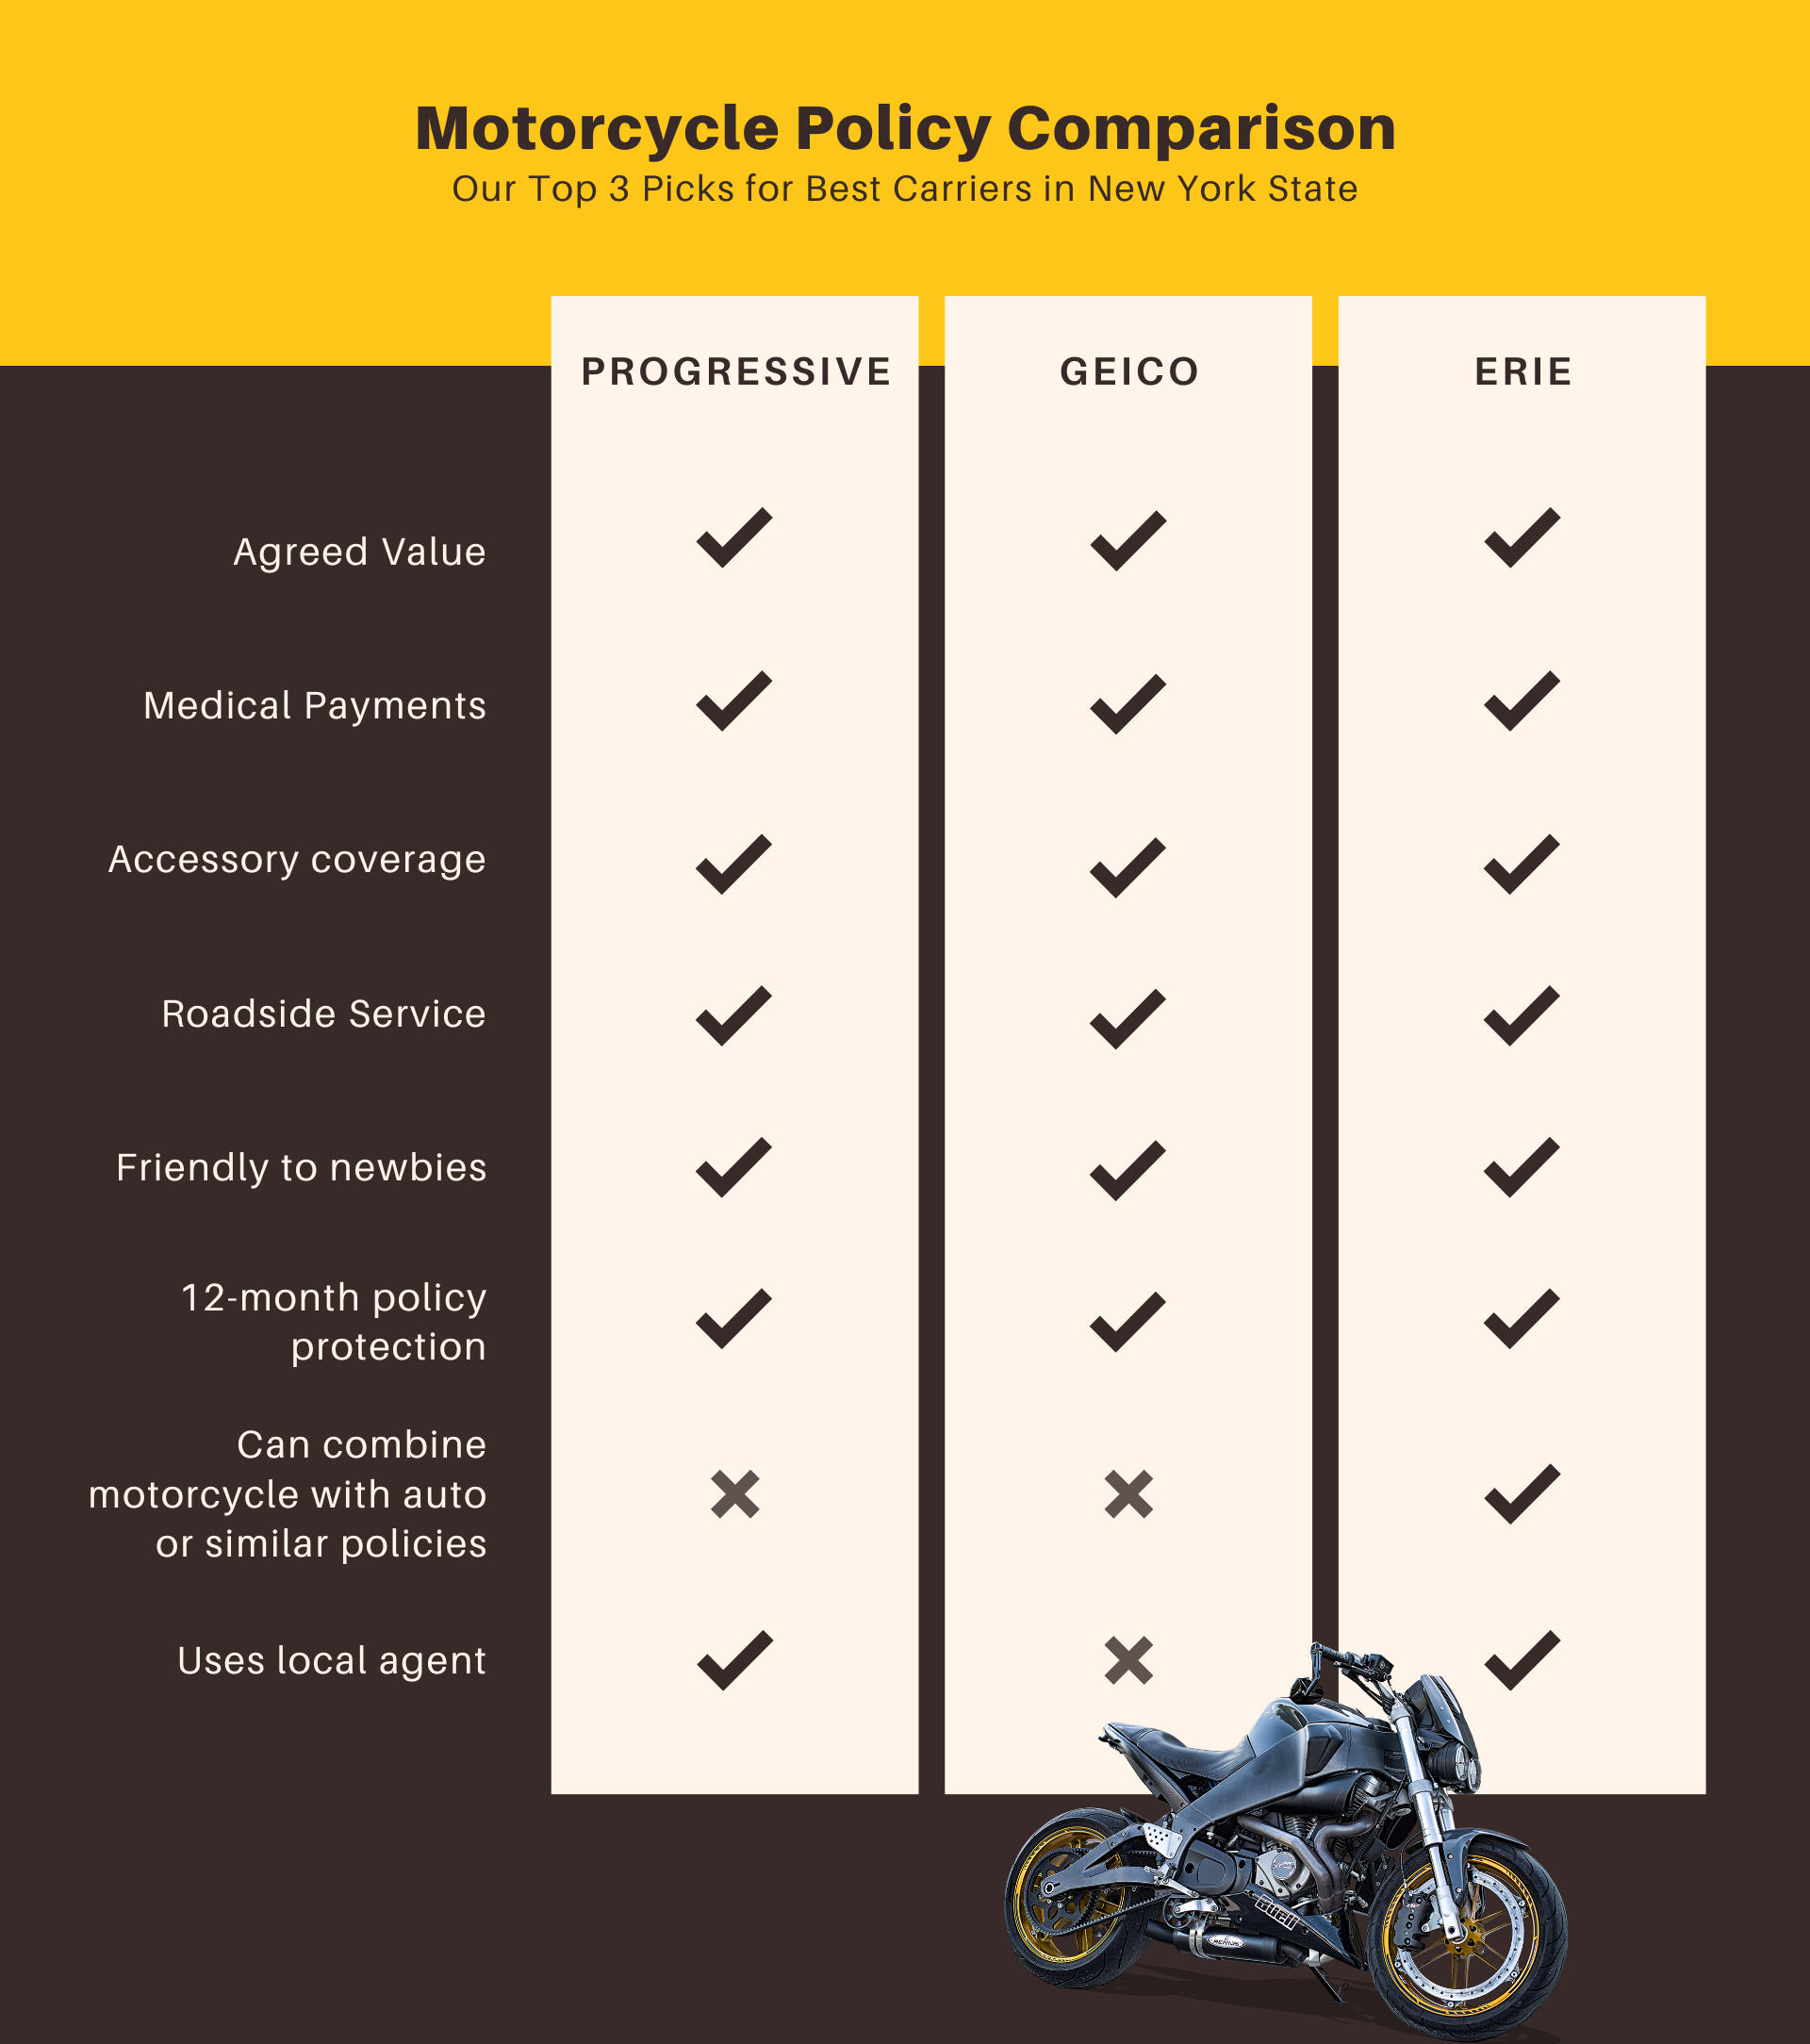 Infographic-1_Our-Top-3-Picks-for-Best-Motorcycle-Insurance-Carriers (1400 × 1280 px)